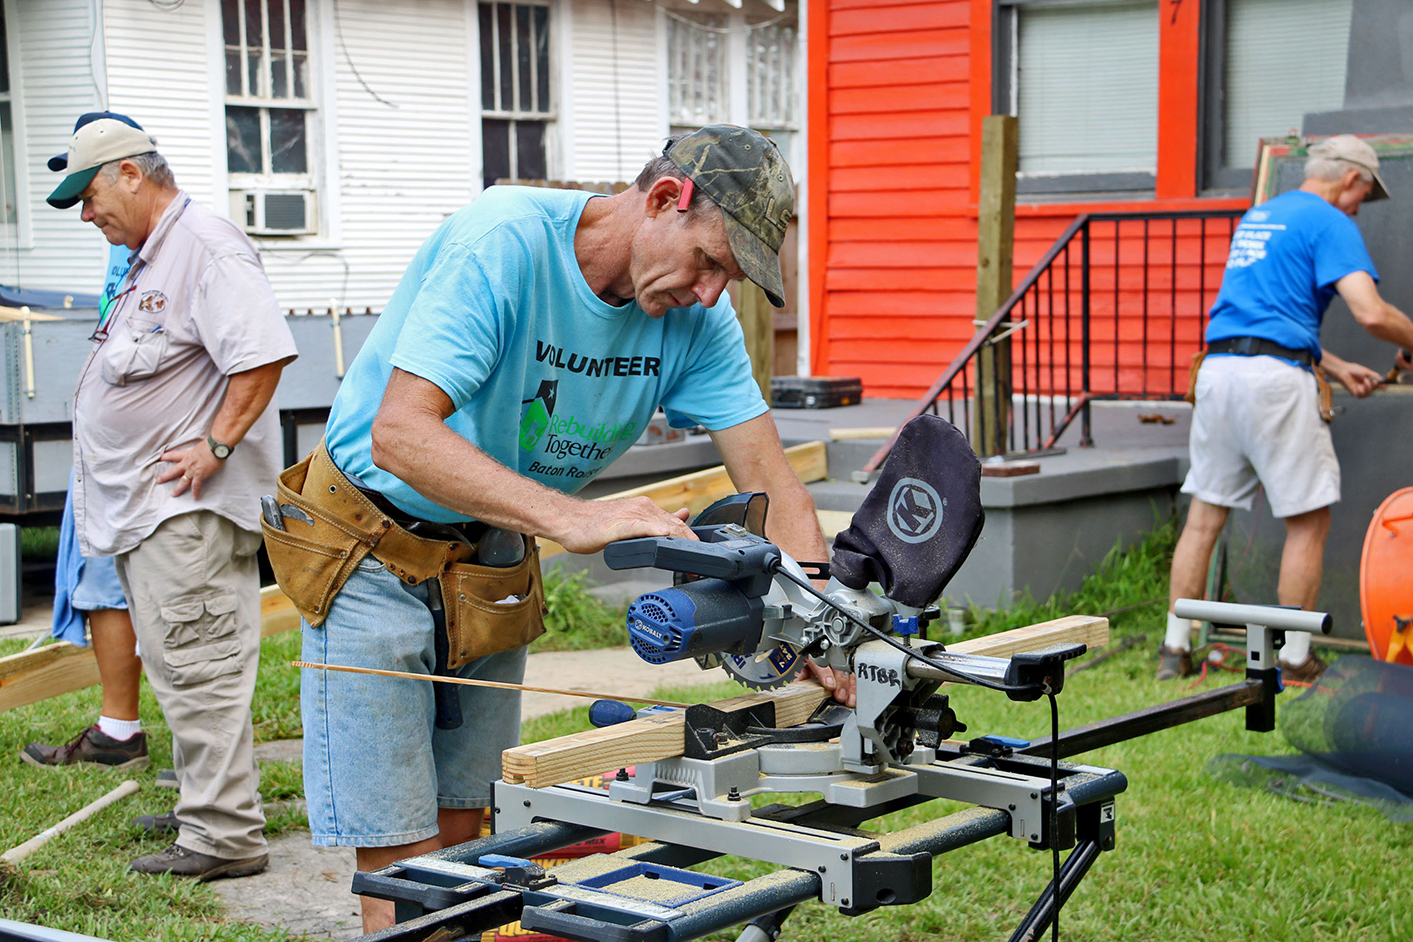 A Silver Hammers volunteer saws wood to help build handicap-accessible ramps at a Fairfields Avenue home. Photo by Matt Deville.